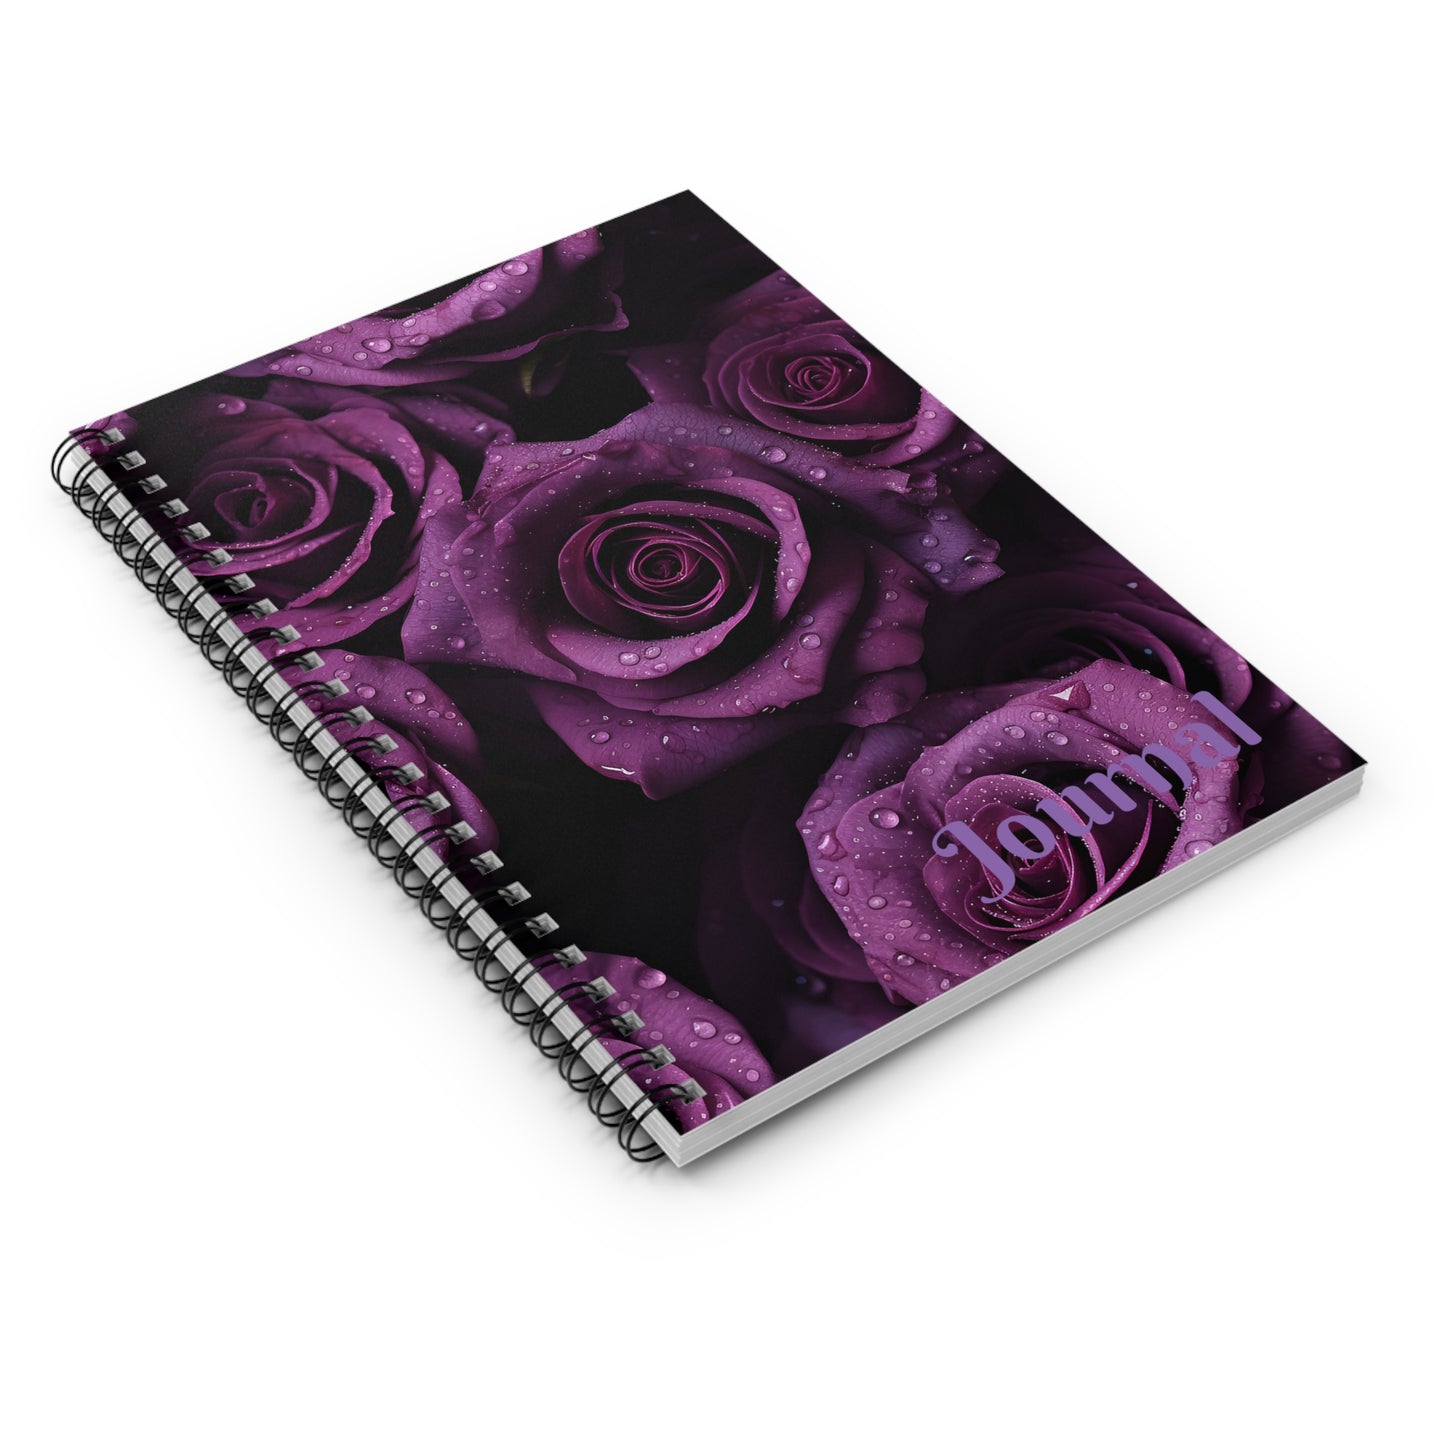 Purple Roses Spiral Notebook - Ruled Line